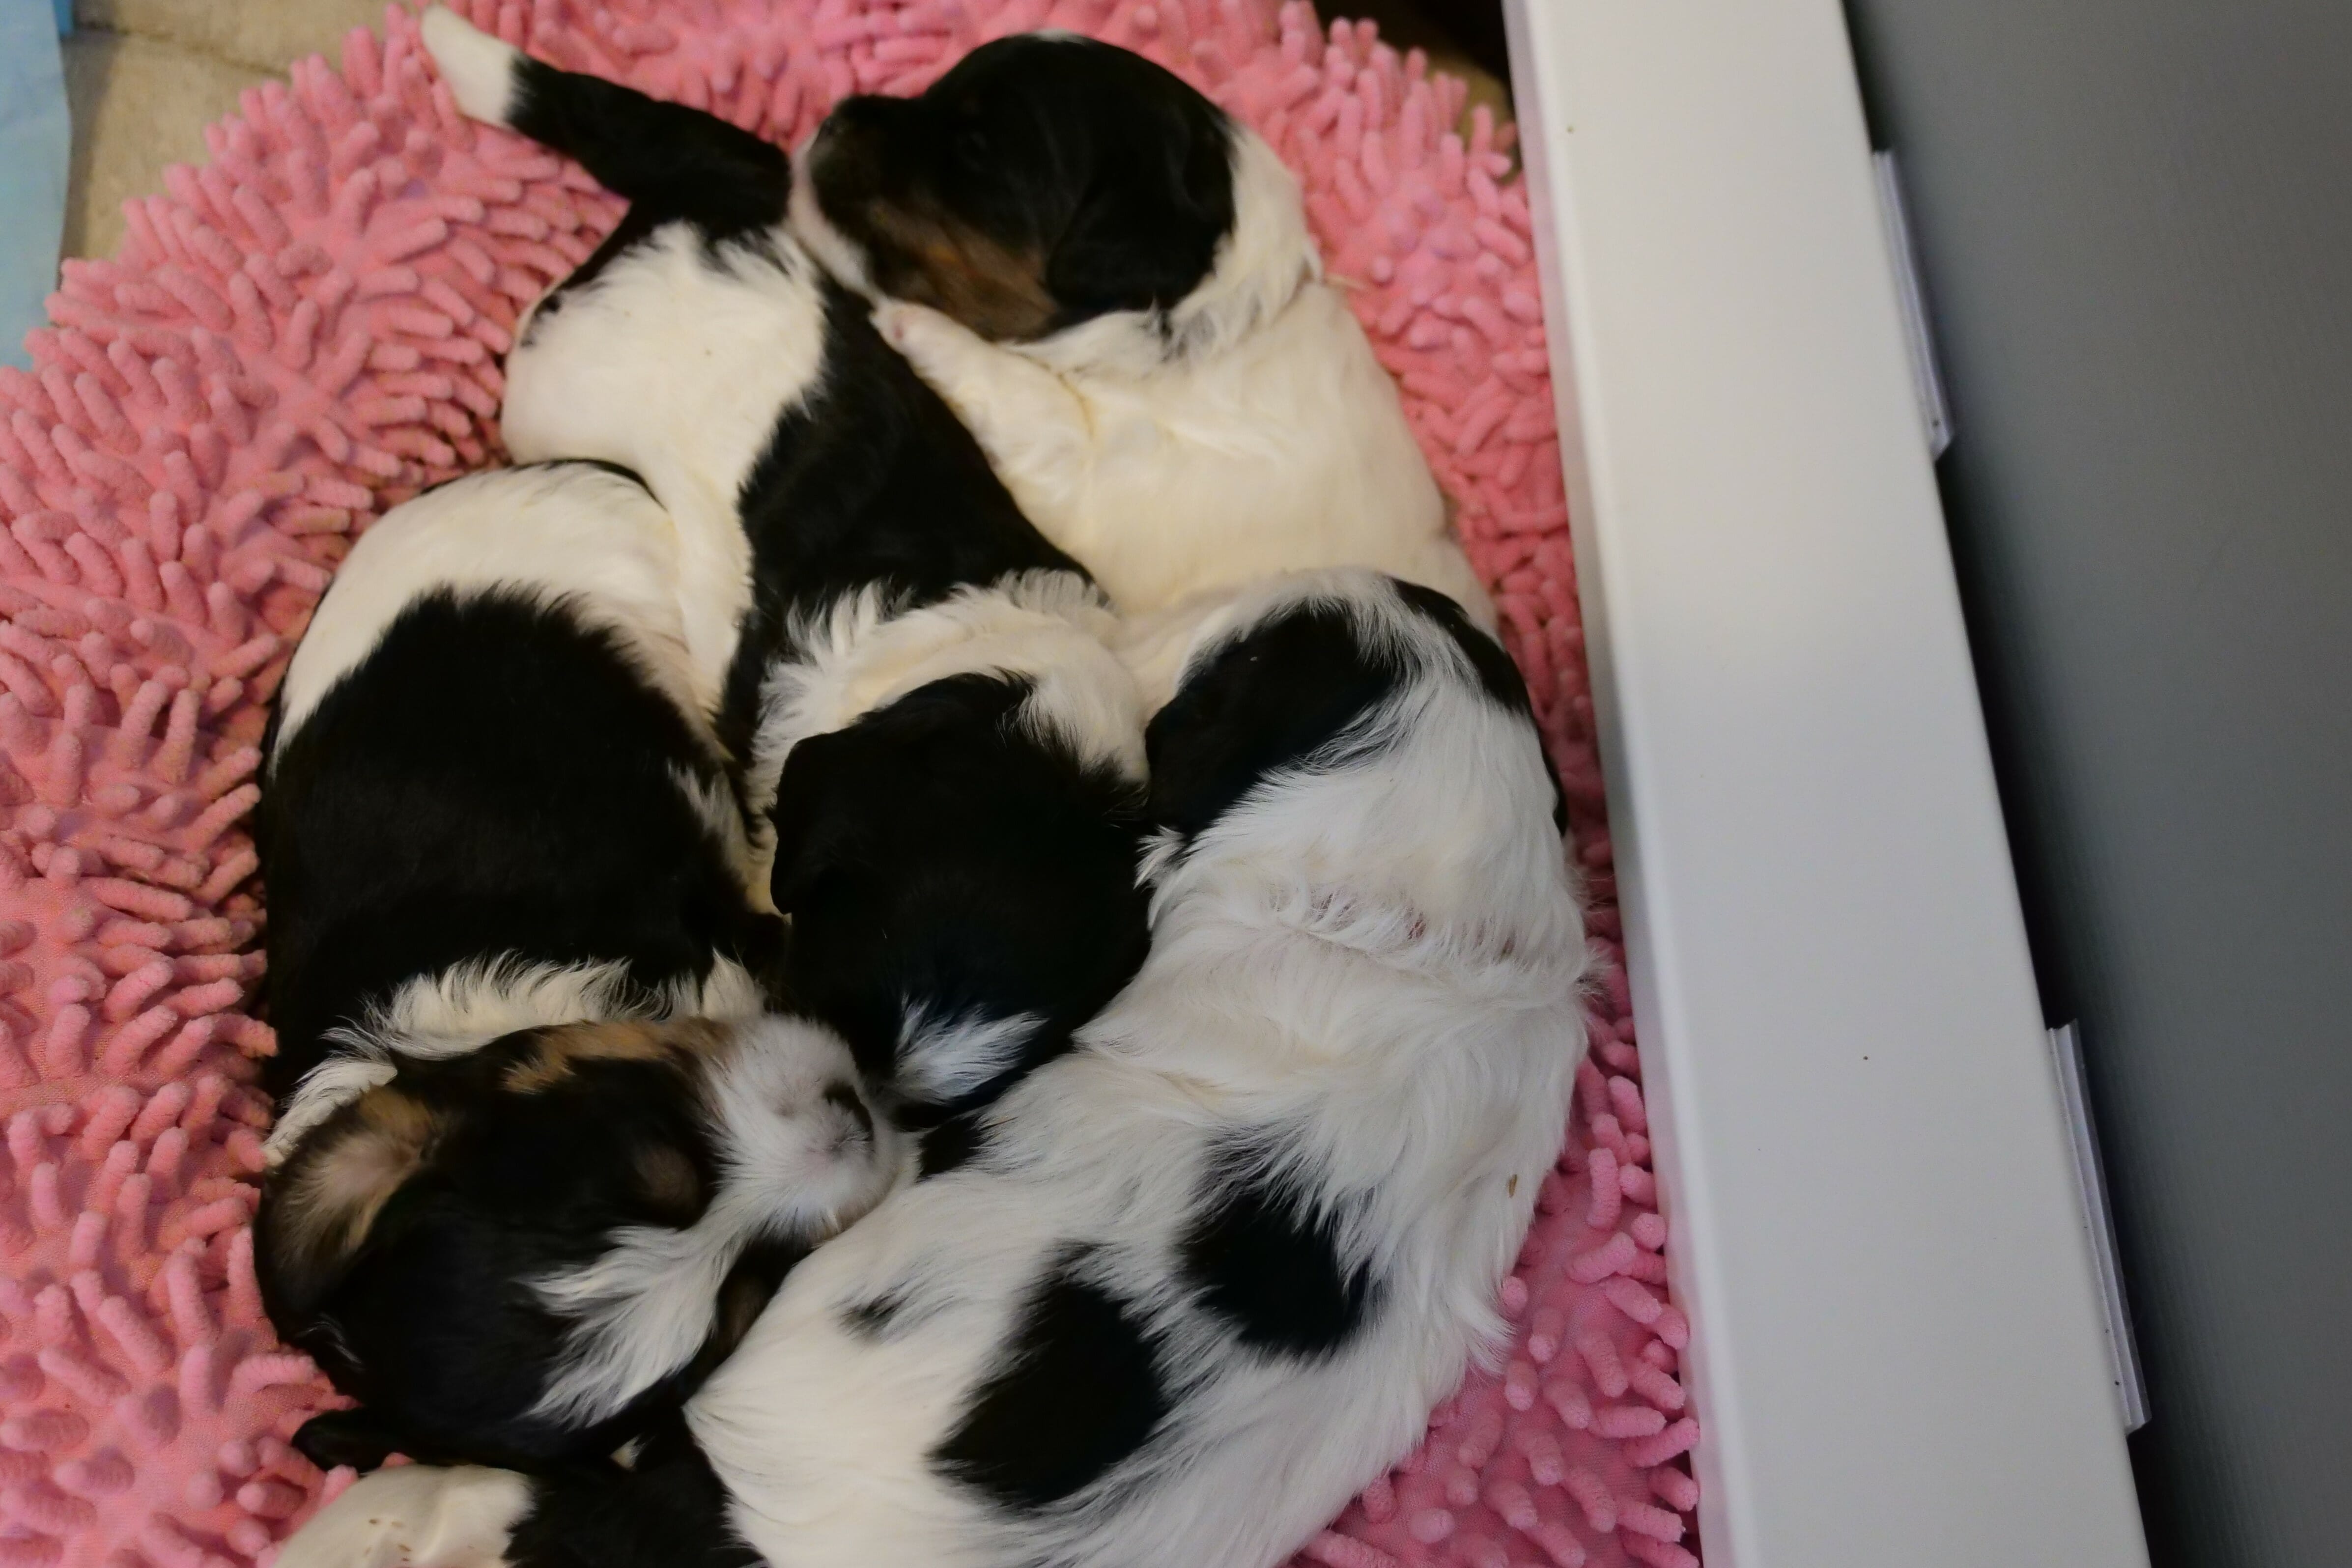 Four 3-week old black and white labradoodle puppies. They are lying on a pink blanket, all curled together.